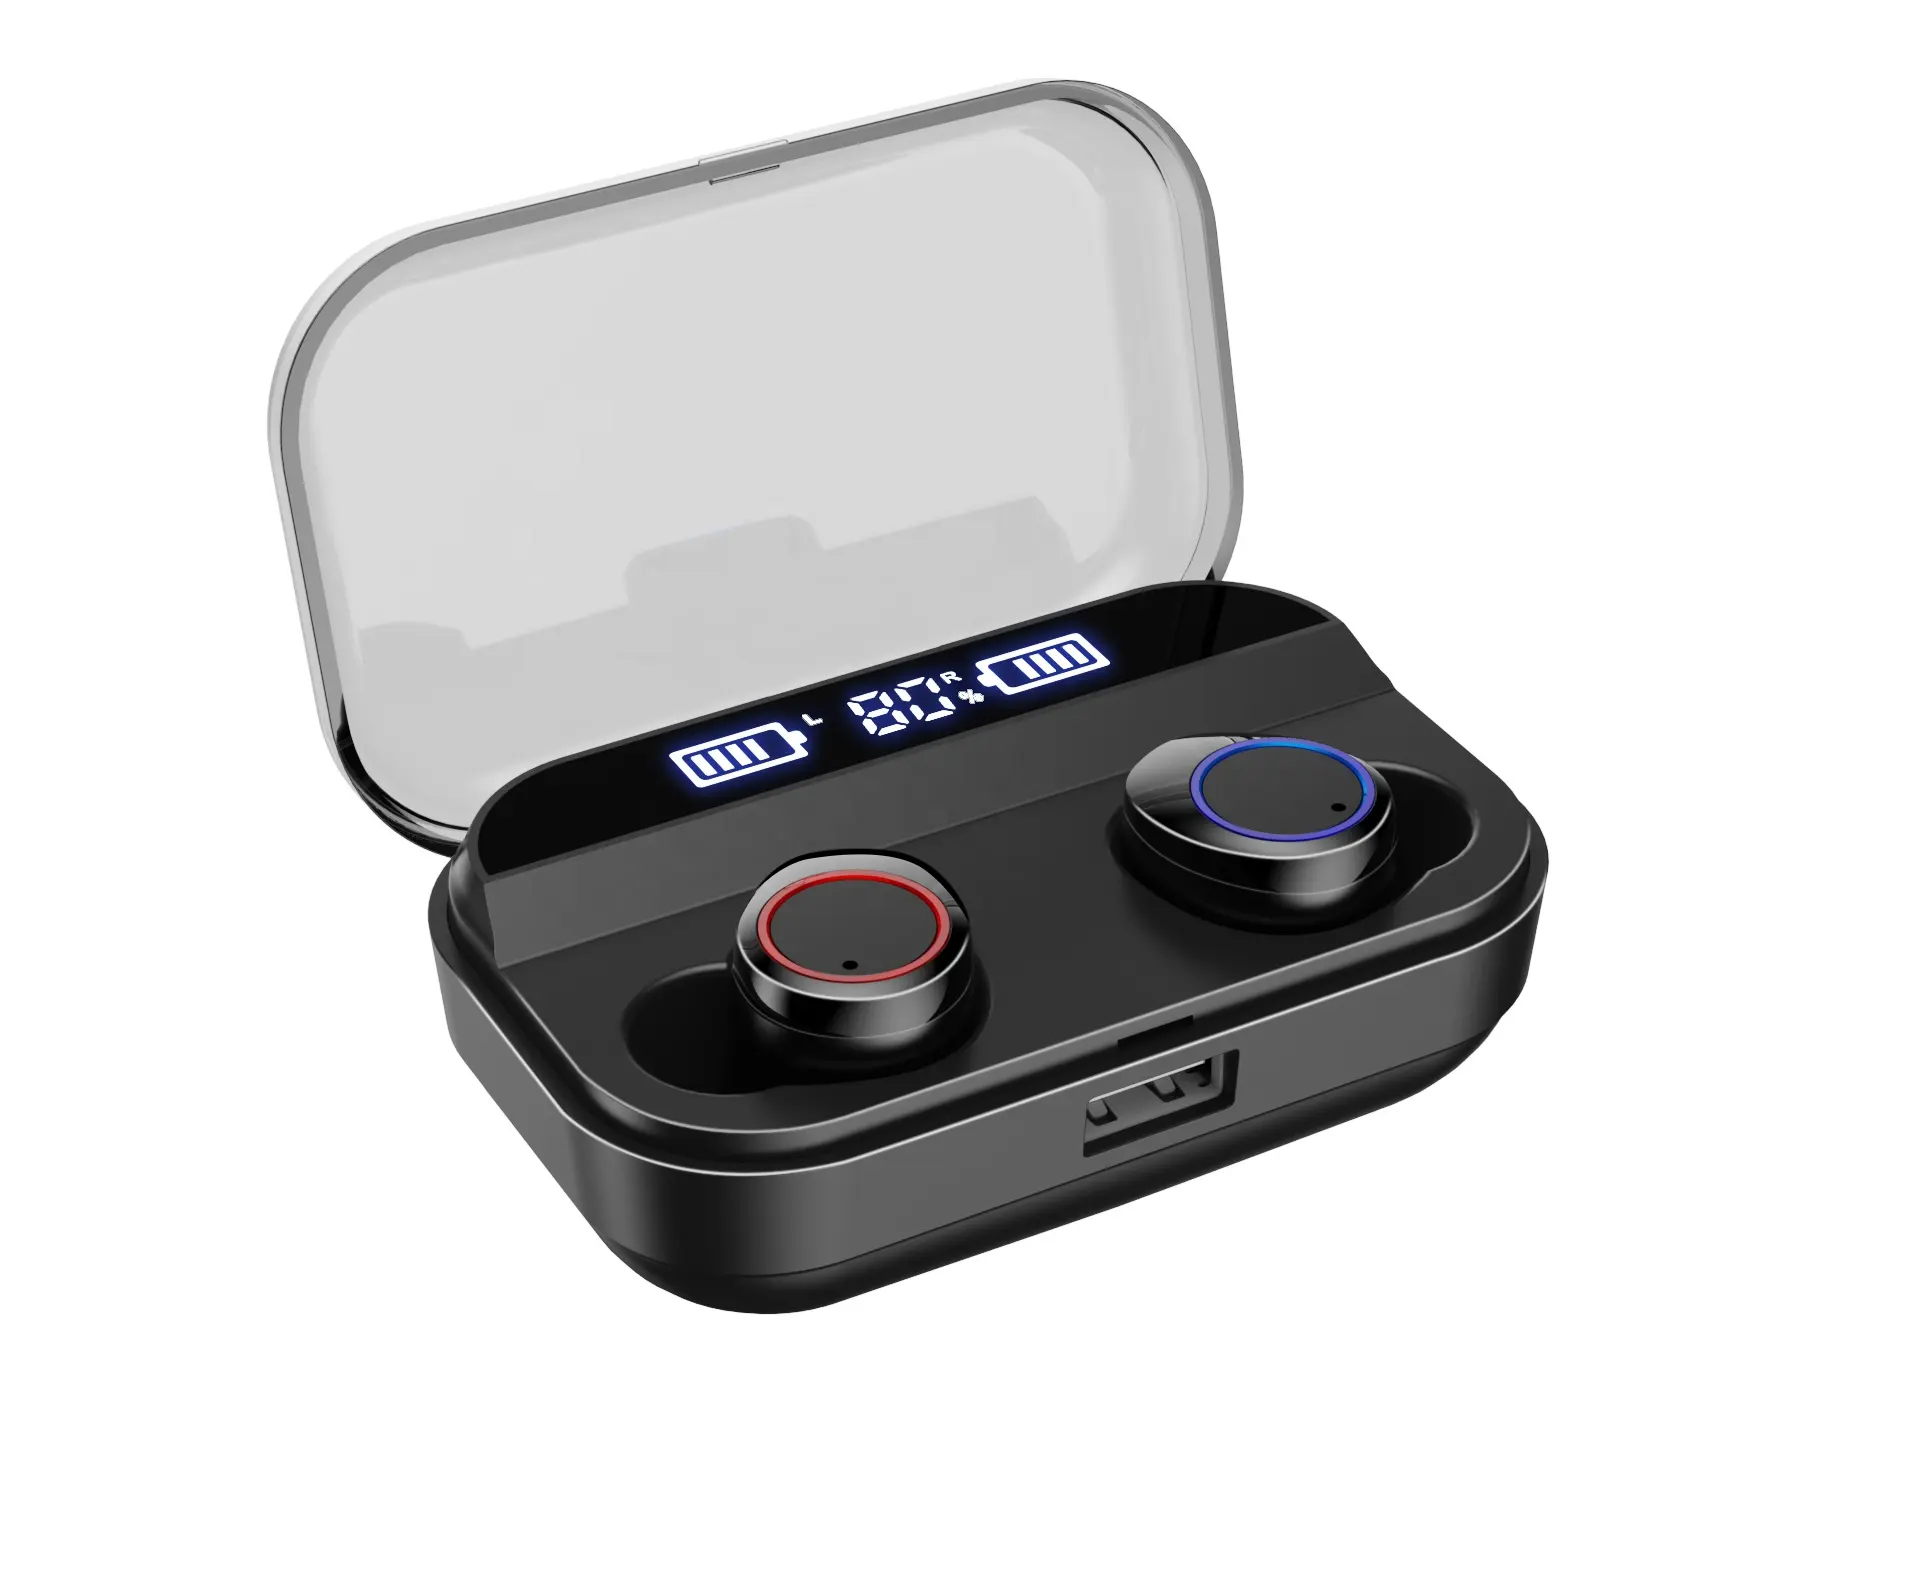 Shenzhen Top Quality 2nd Generation Wireless Bluetooths Earphones Headphones Headsets For Mobile Phone